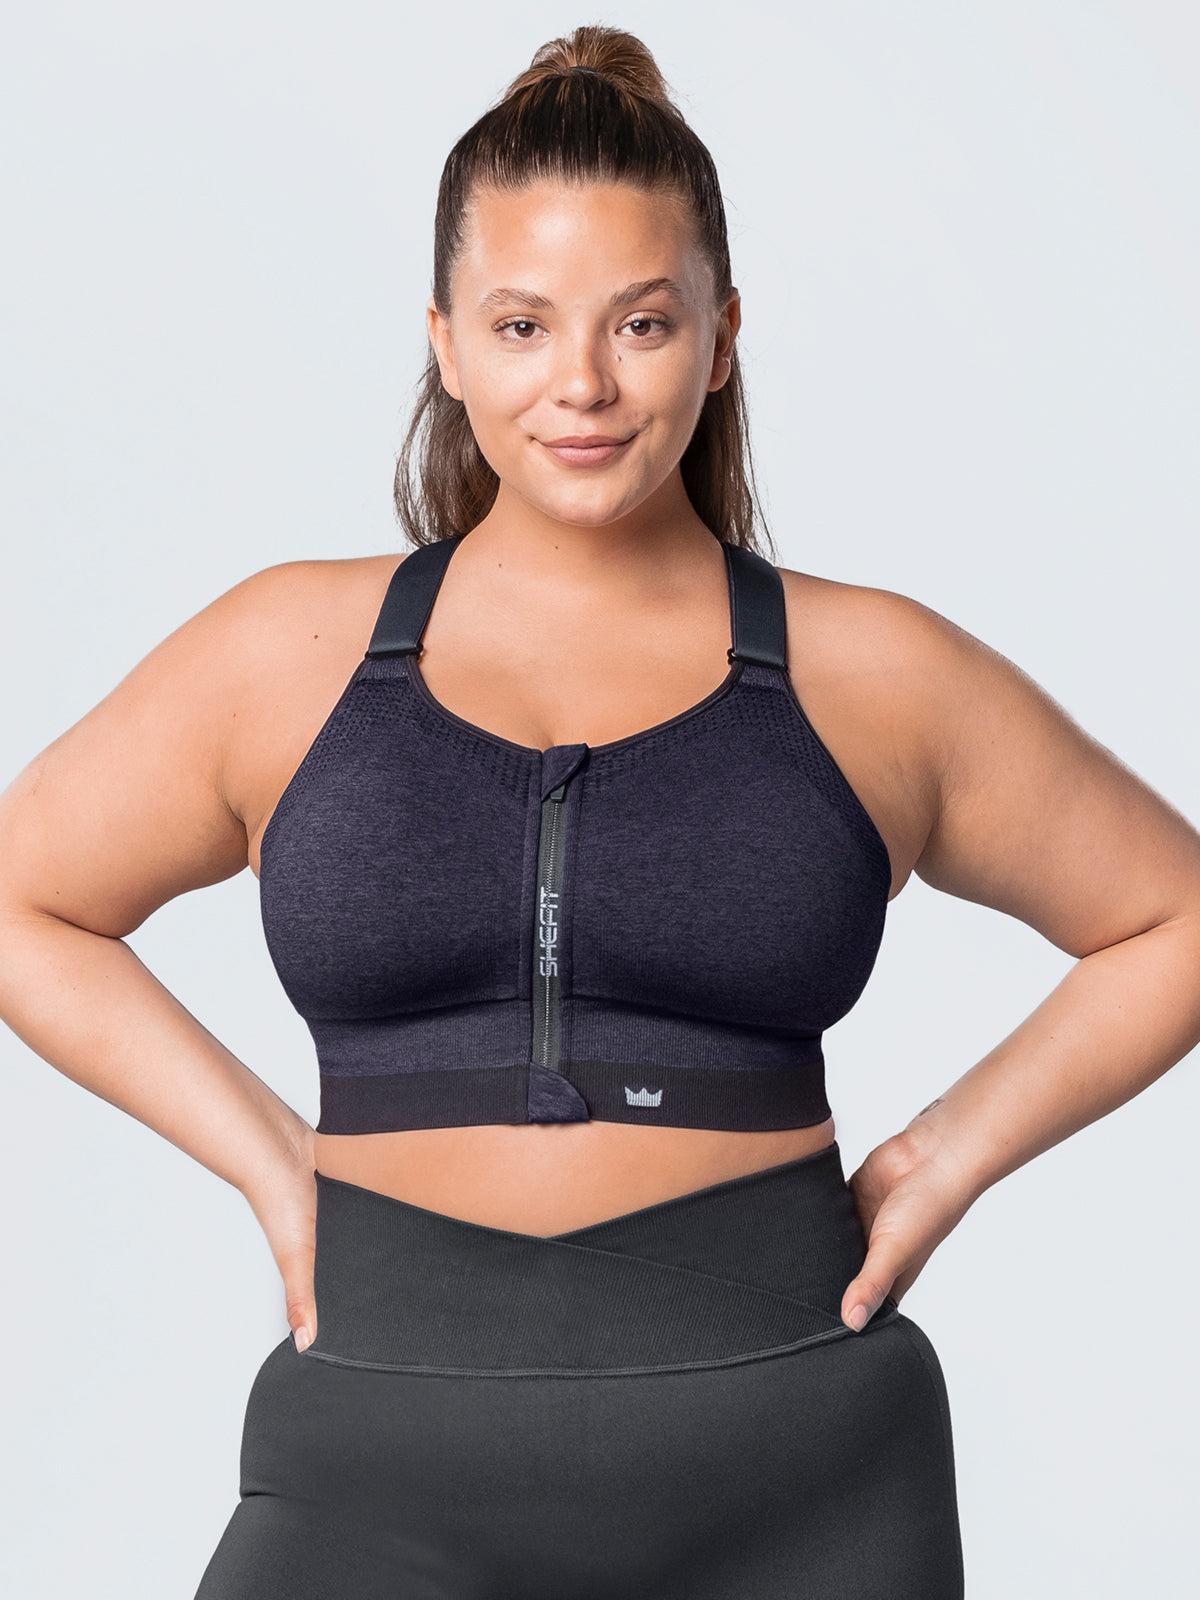 Buy Fit Powermove Longline Sports Bra Online at Best Prices in